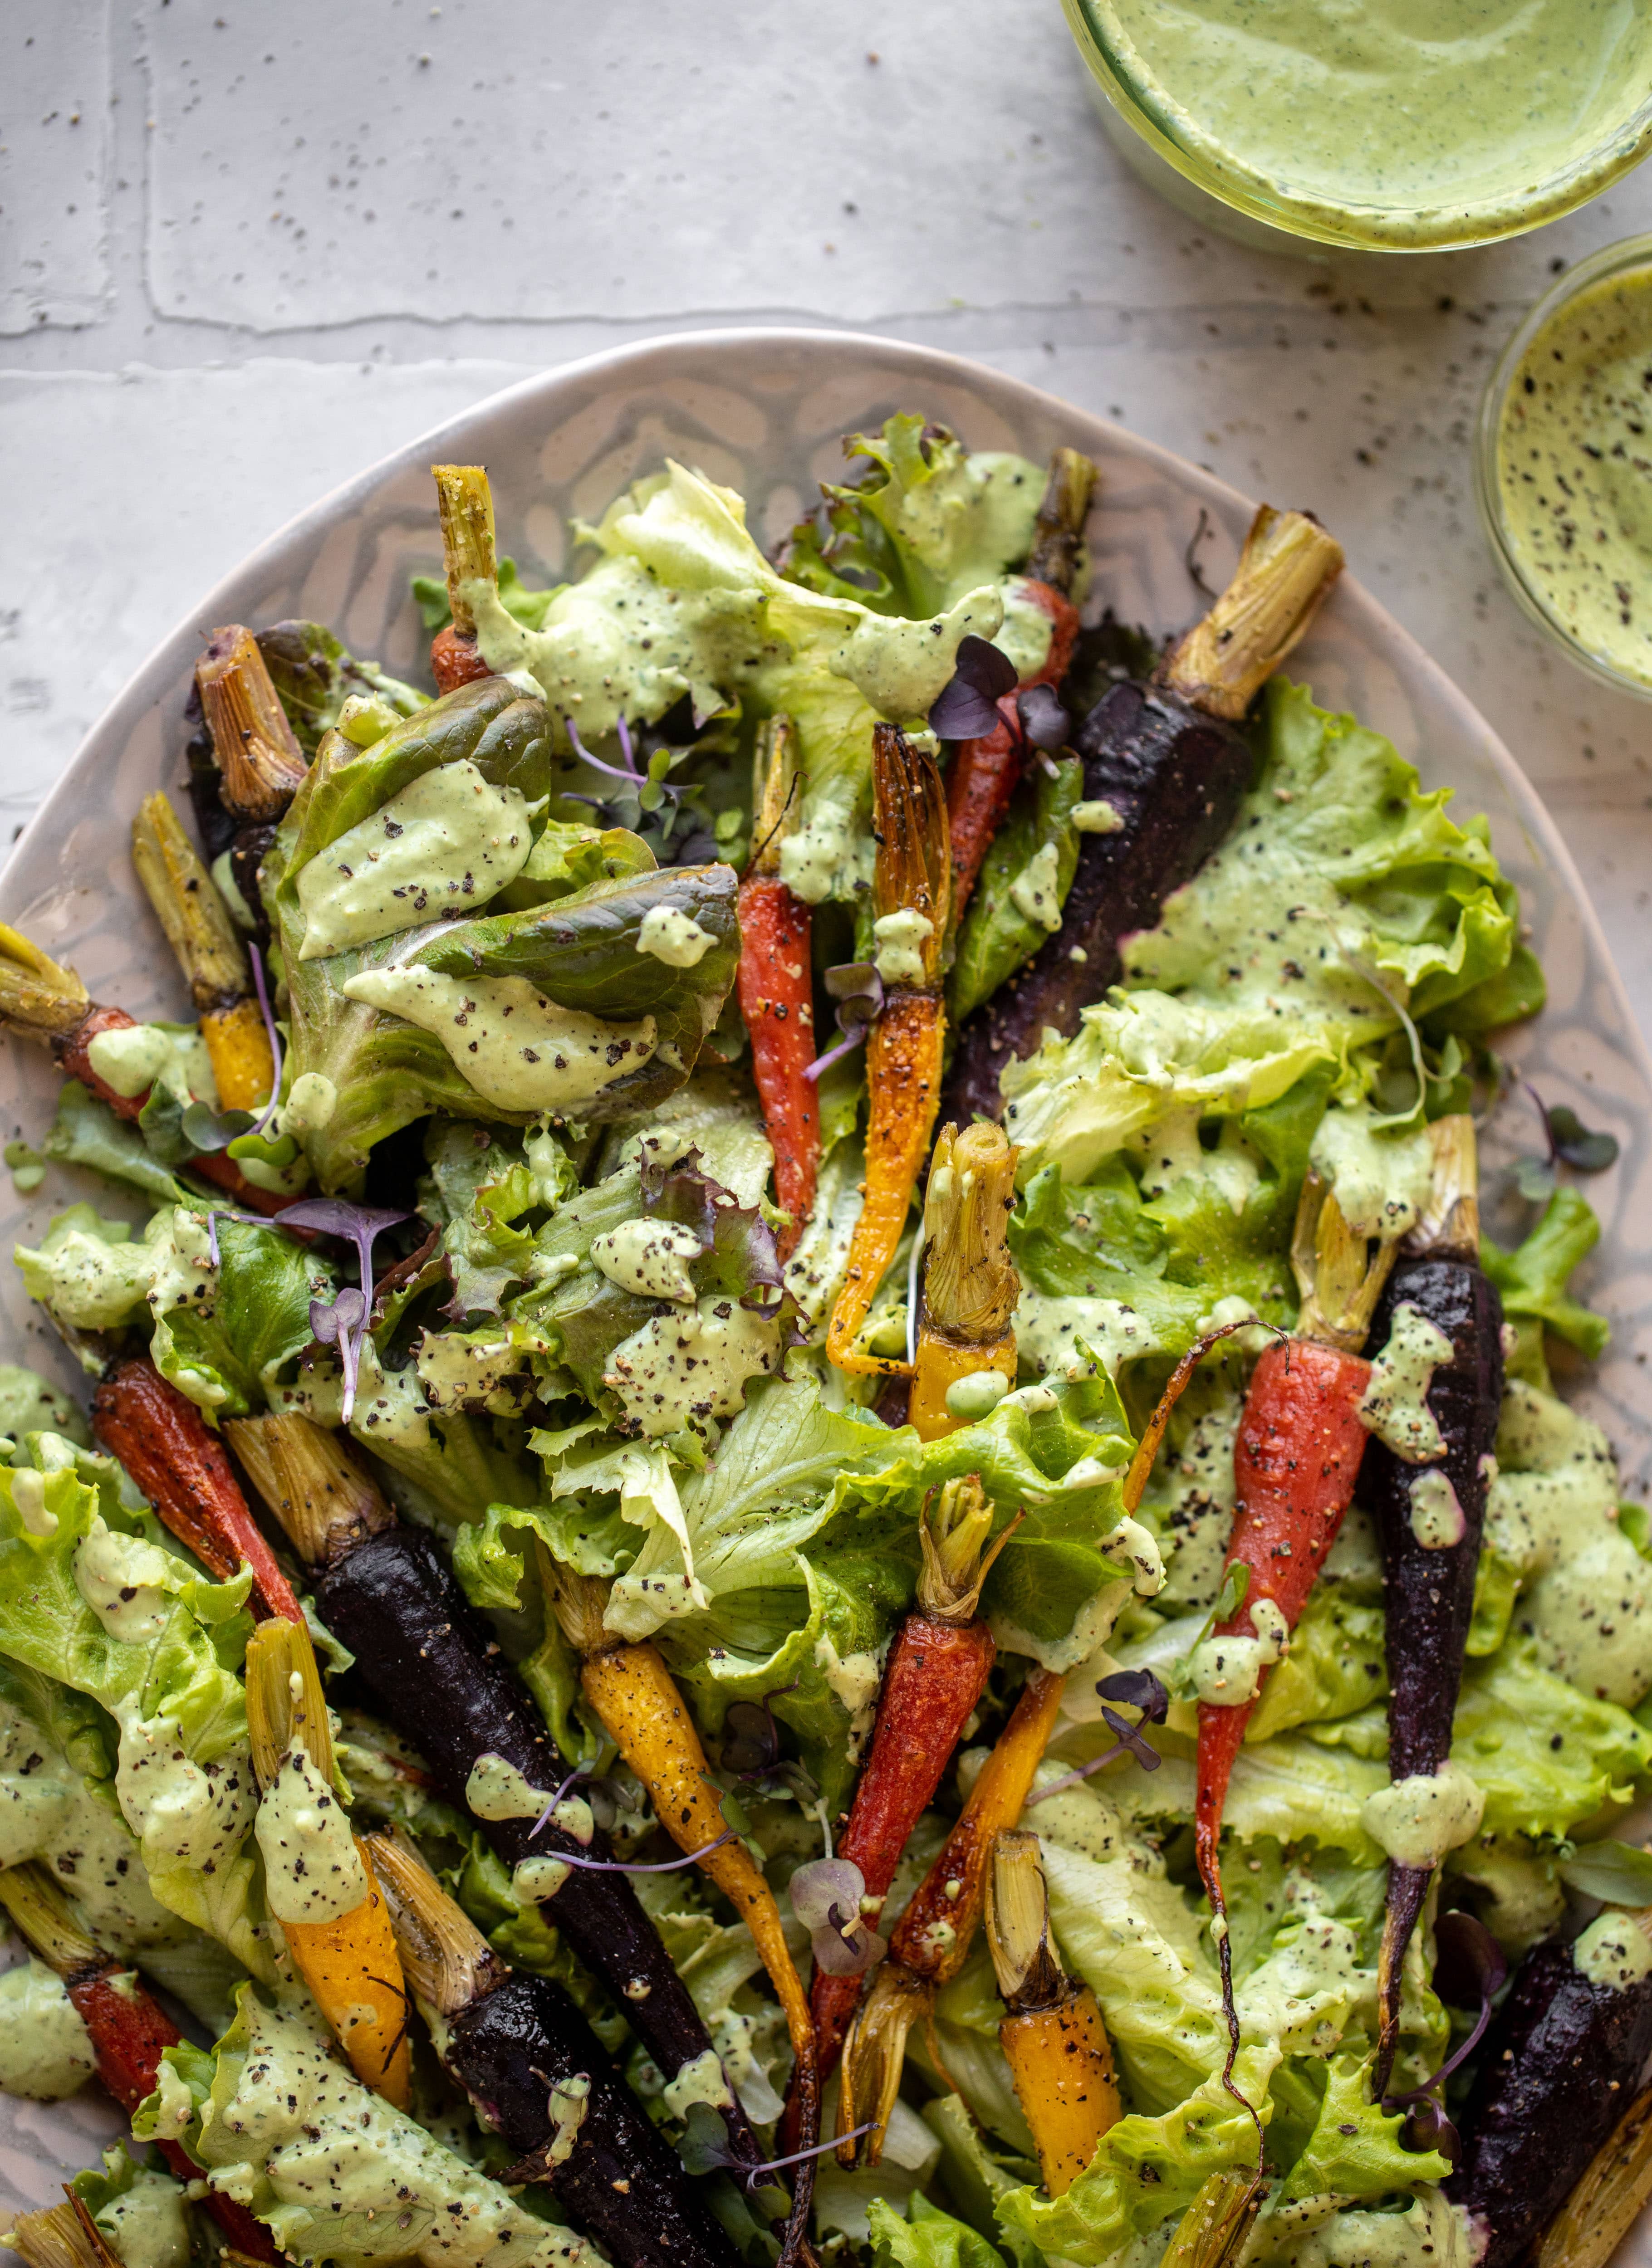 This roasted carrot salad is perfect for spring! Caramely, roasted carrots served over butter greens dressing with green goddess. Simple but delish.